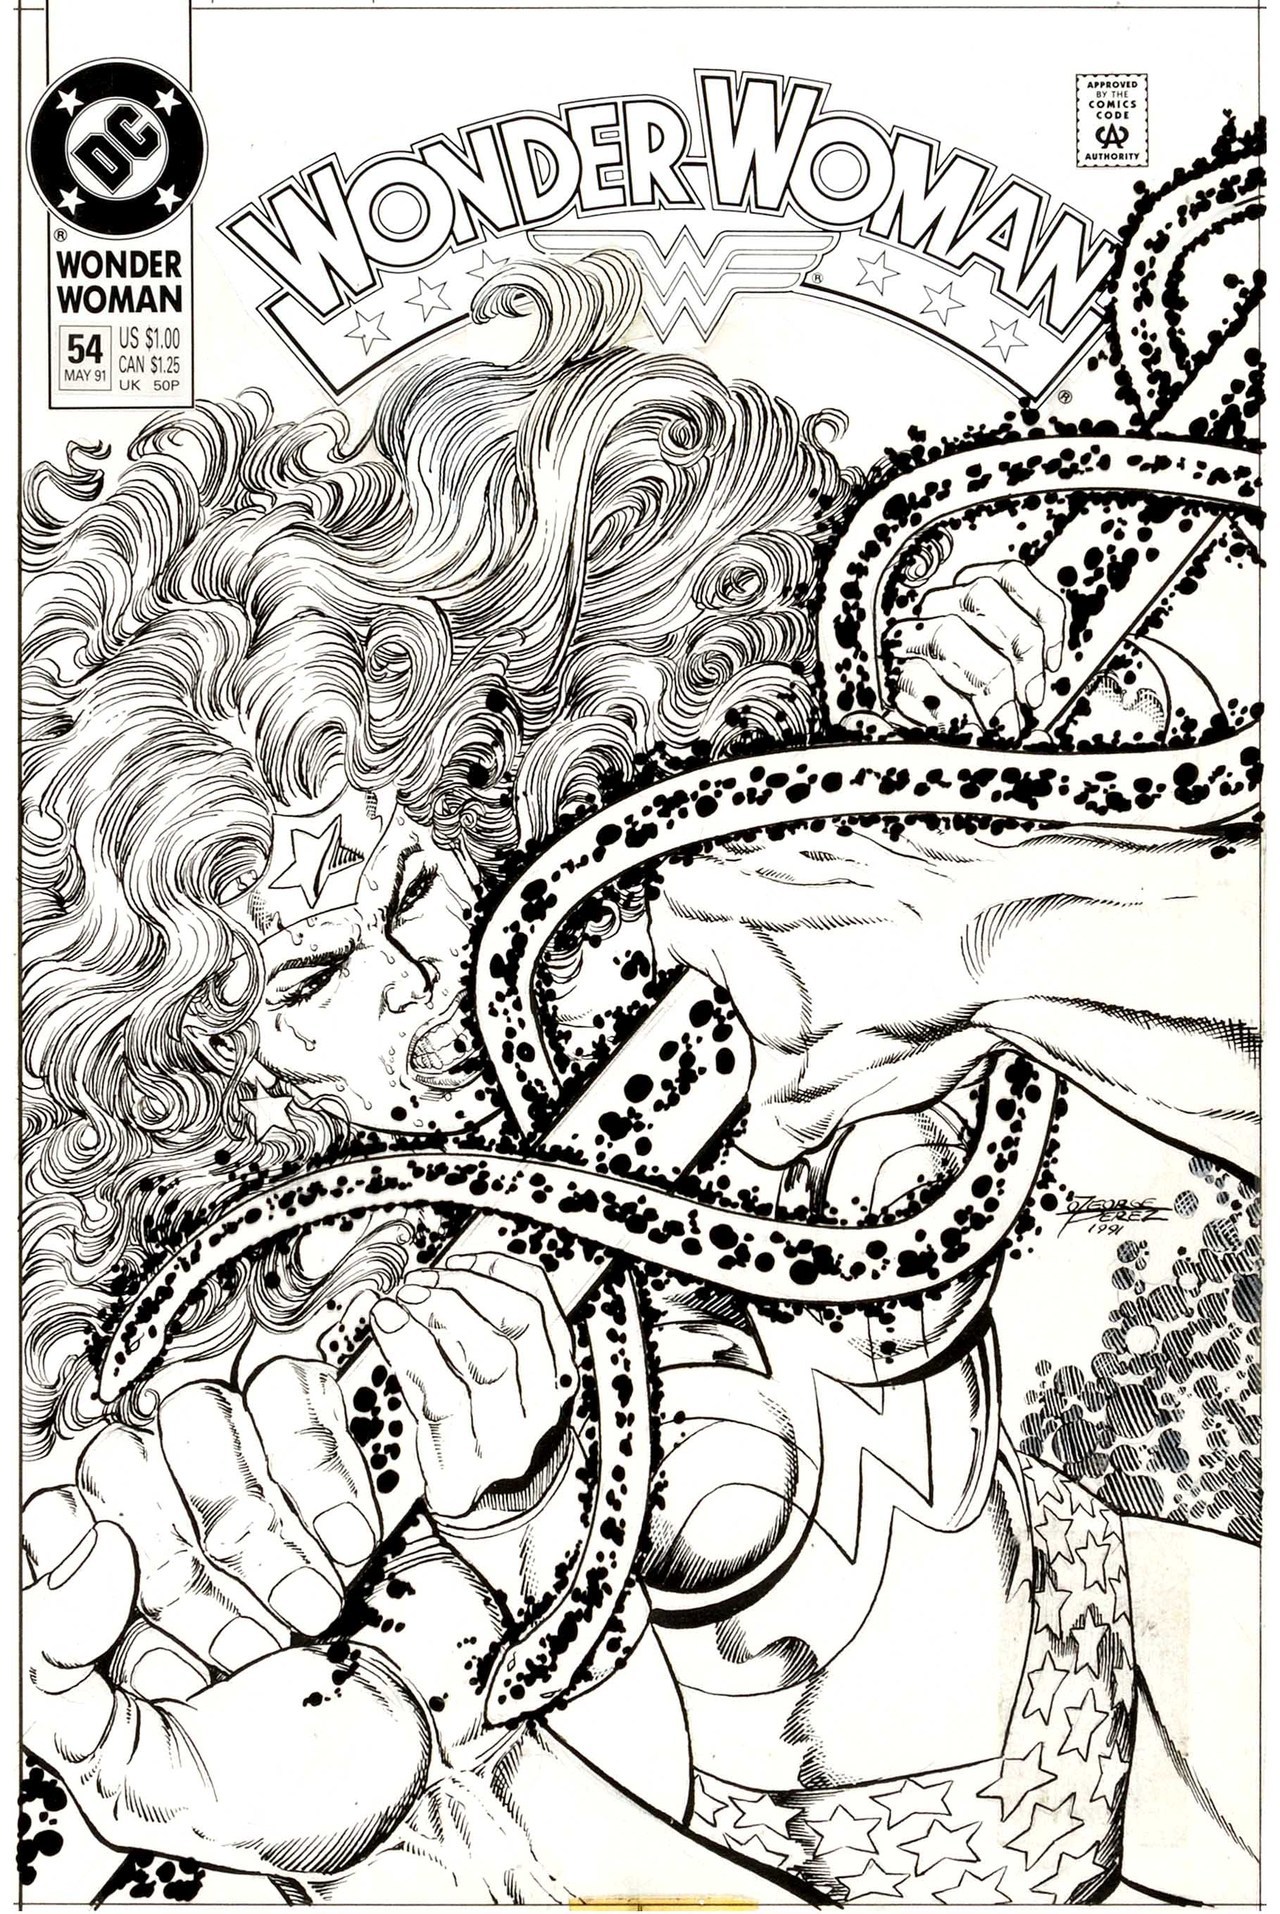 Original cover art by George Pérez from Wonder Woman #54, published by DC Comics, May 1991